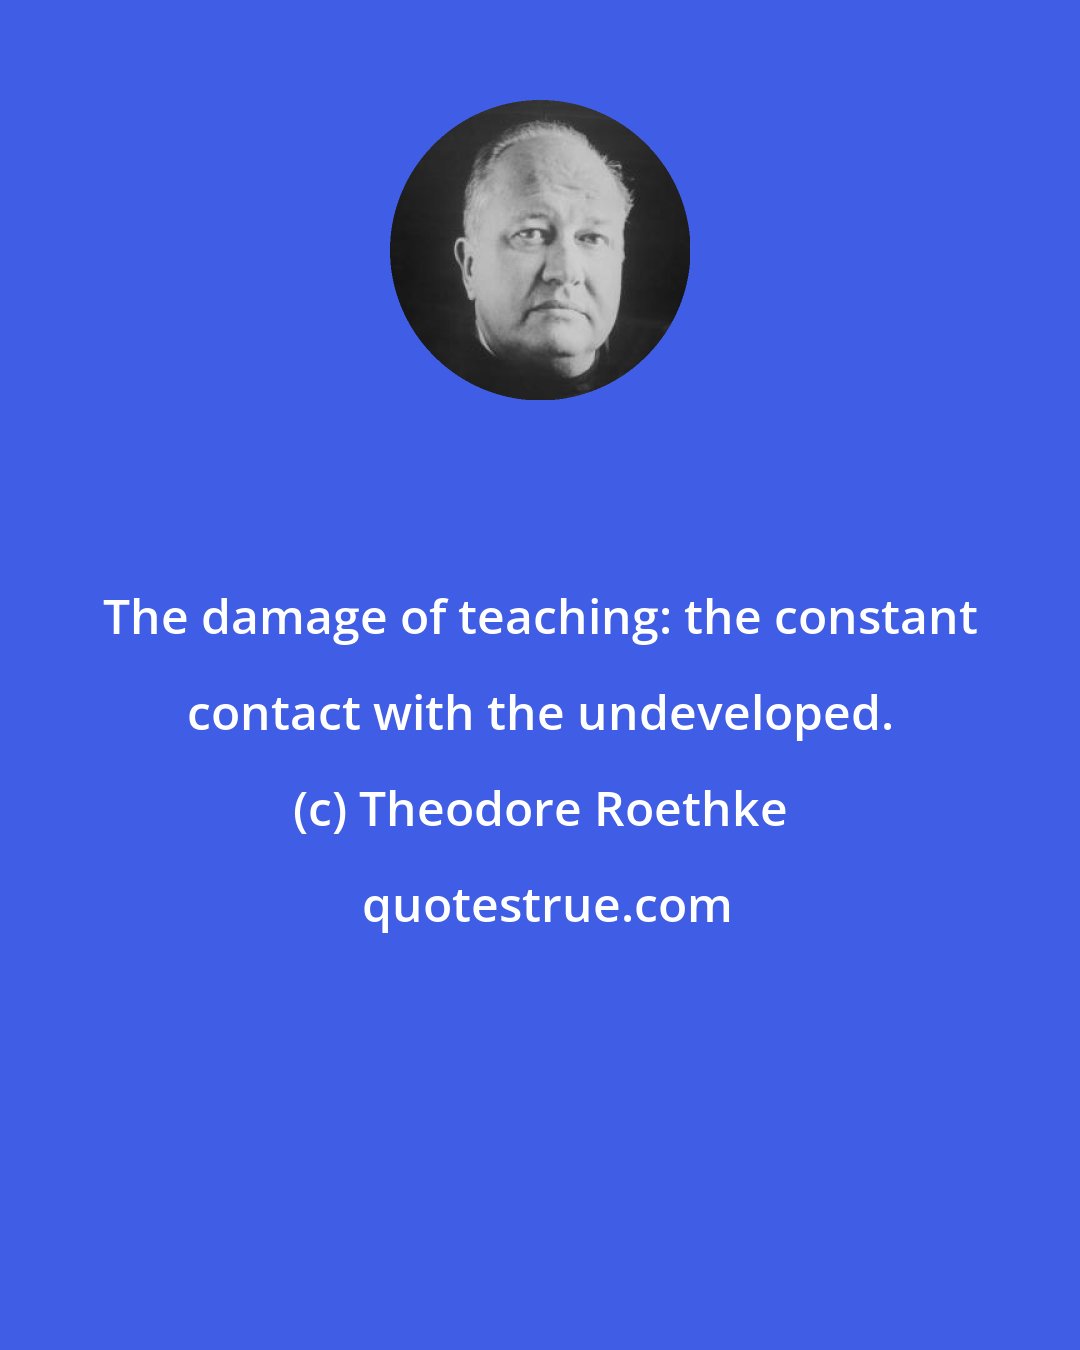 Theodore Roethke: The damage of teaching: the constant contact with the undeveloped.